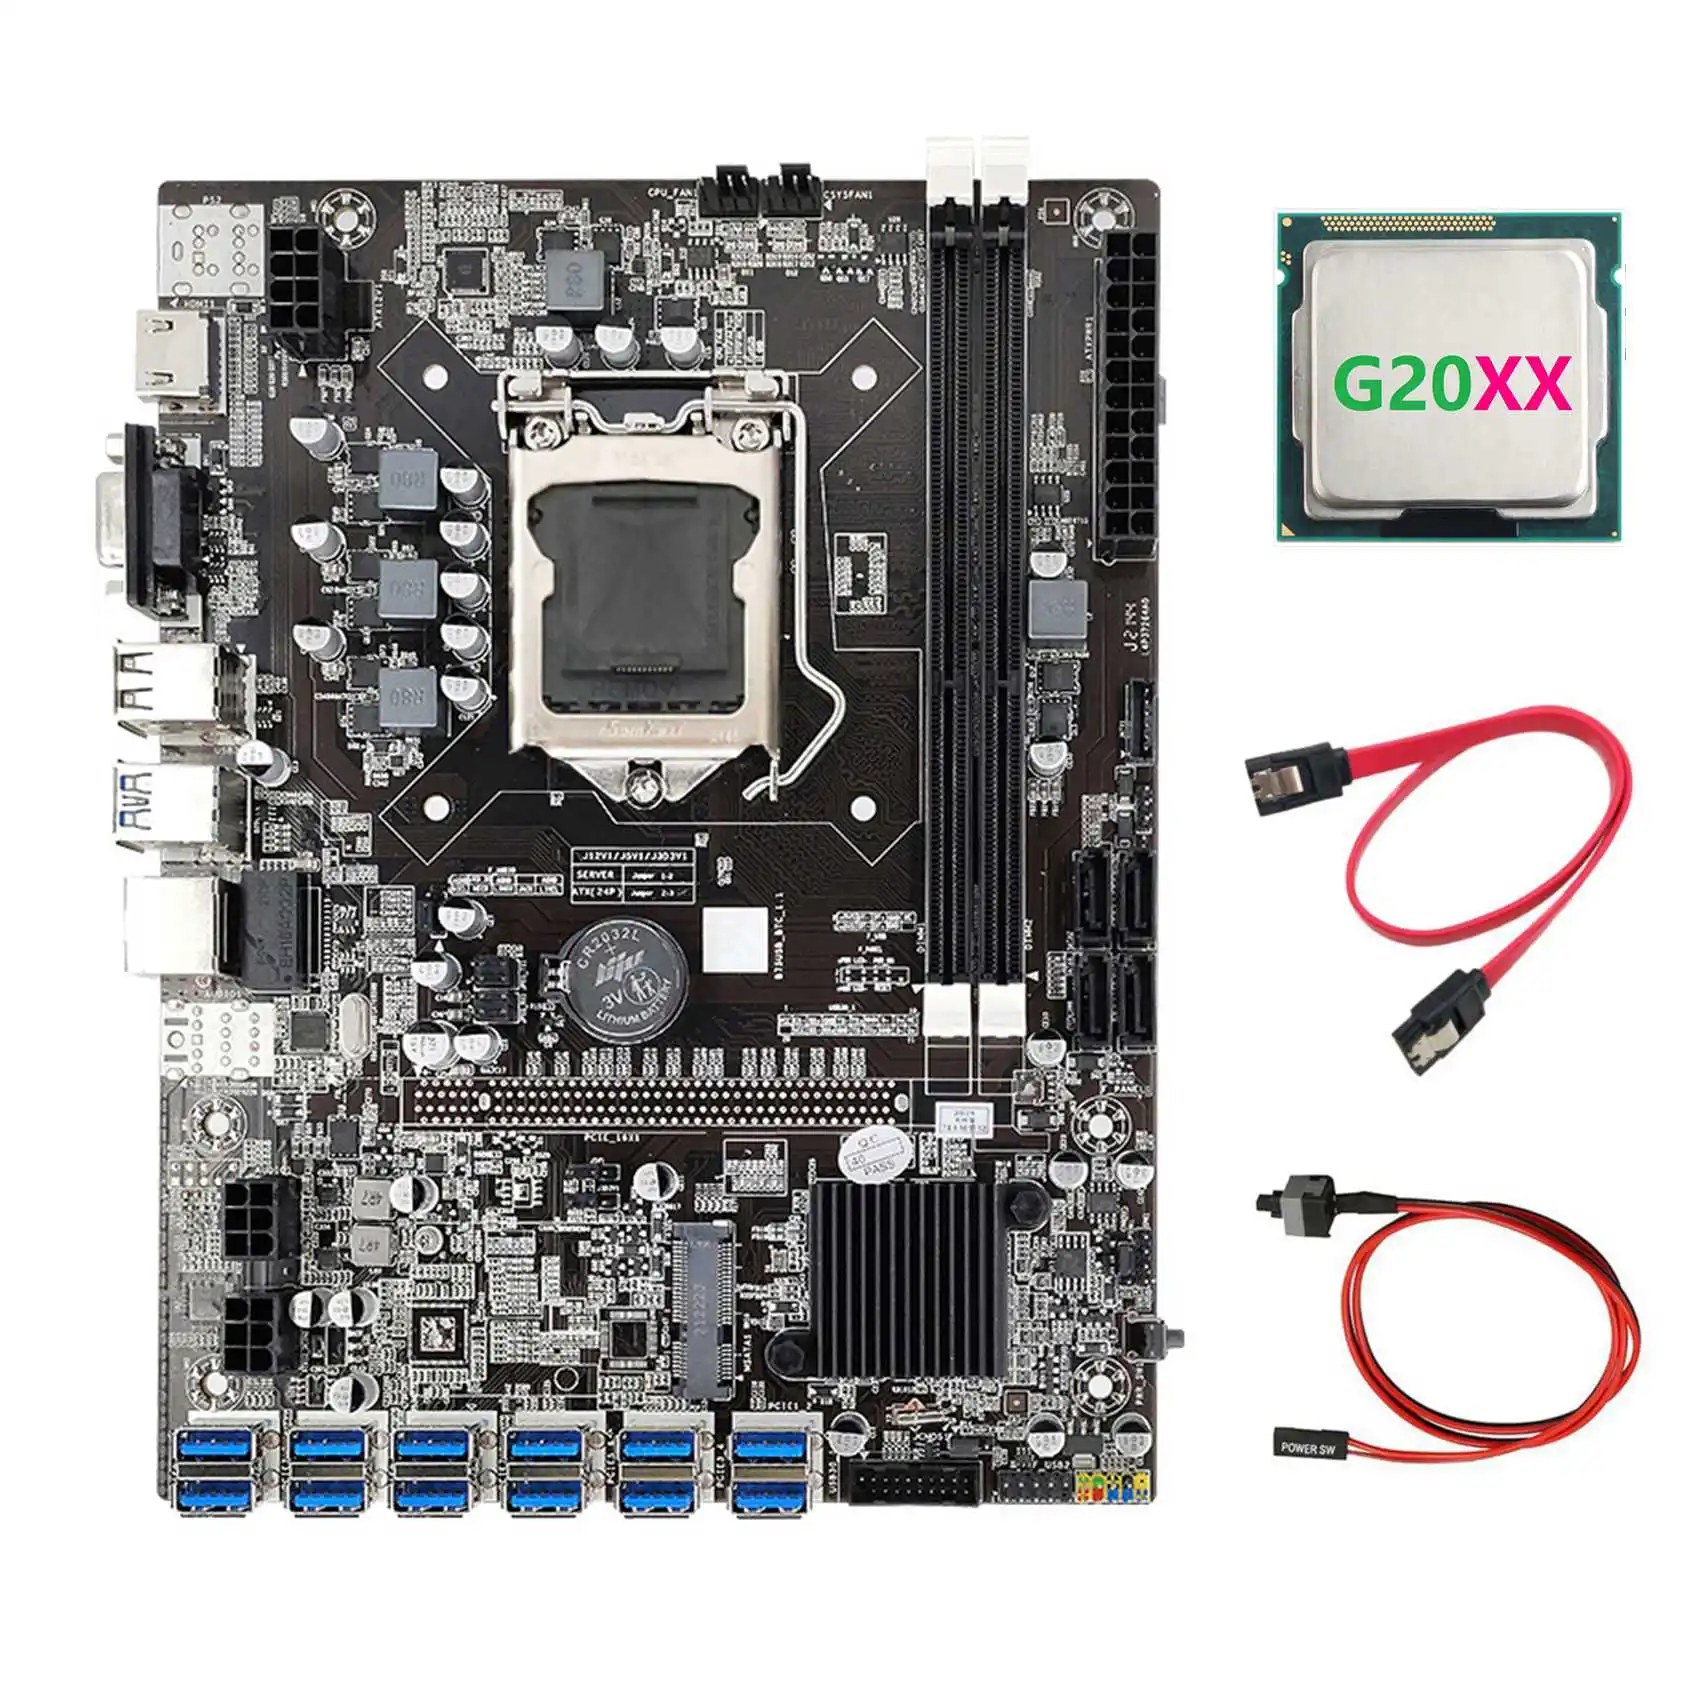 

B75 USB ETH Mining Motherboard+G20XX CPU+SATA Cable+Switch Cable 12XPCIE to USB3.0 DDR3 LGA1155 BTC Miner Motherboard